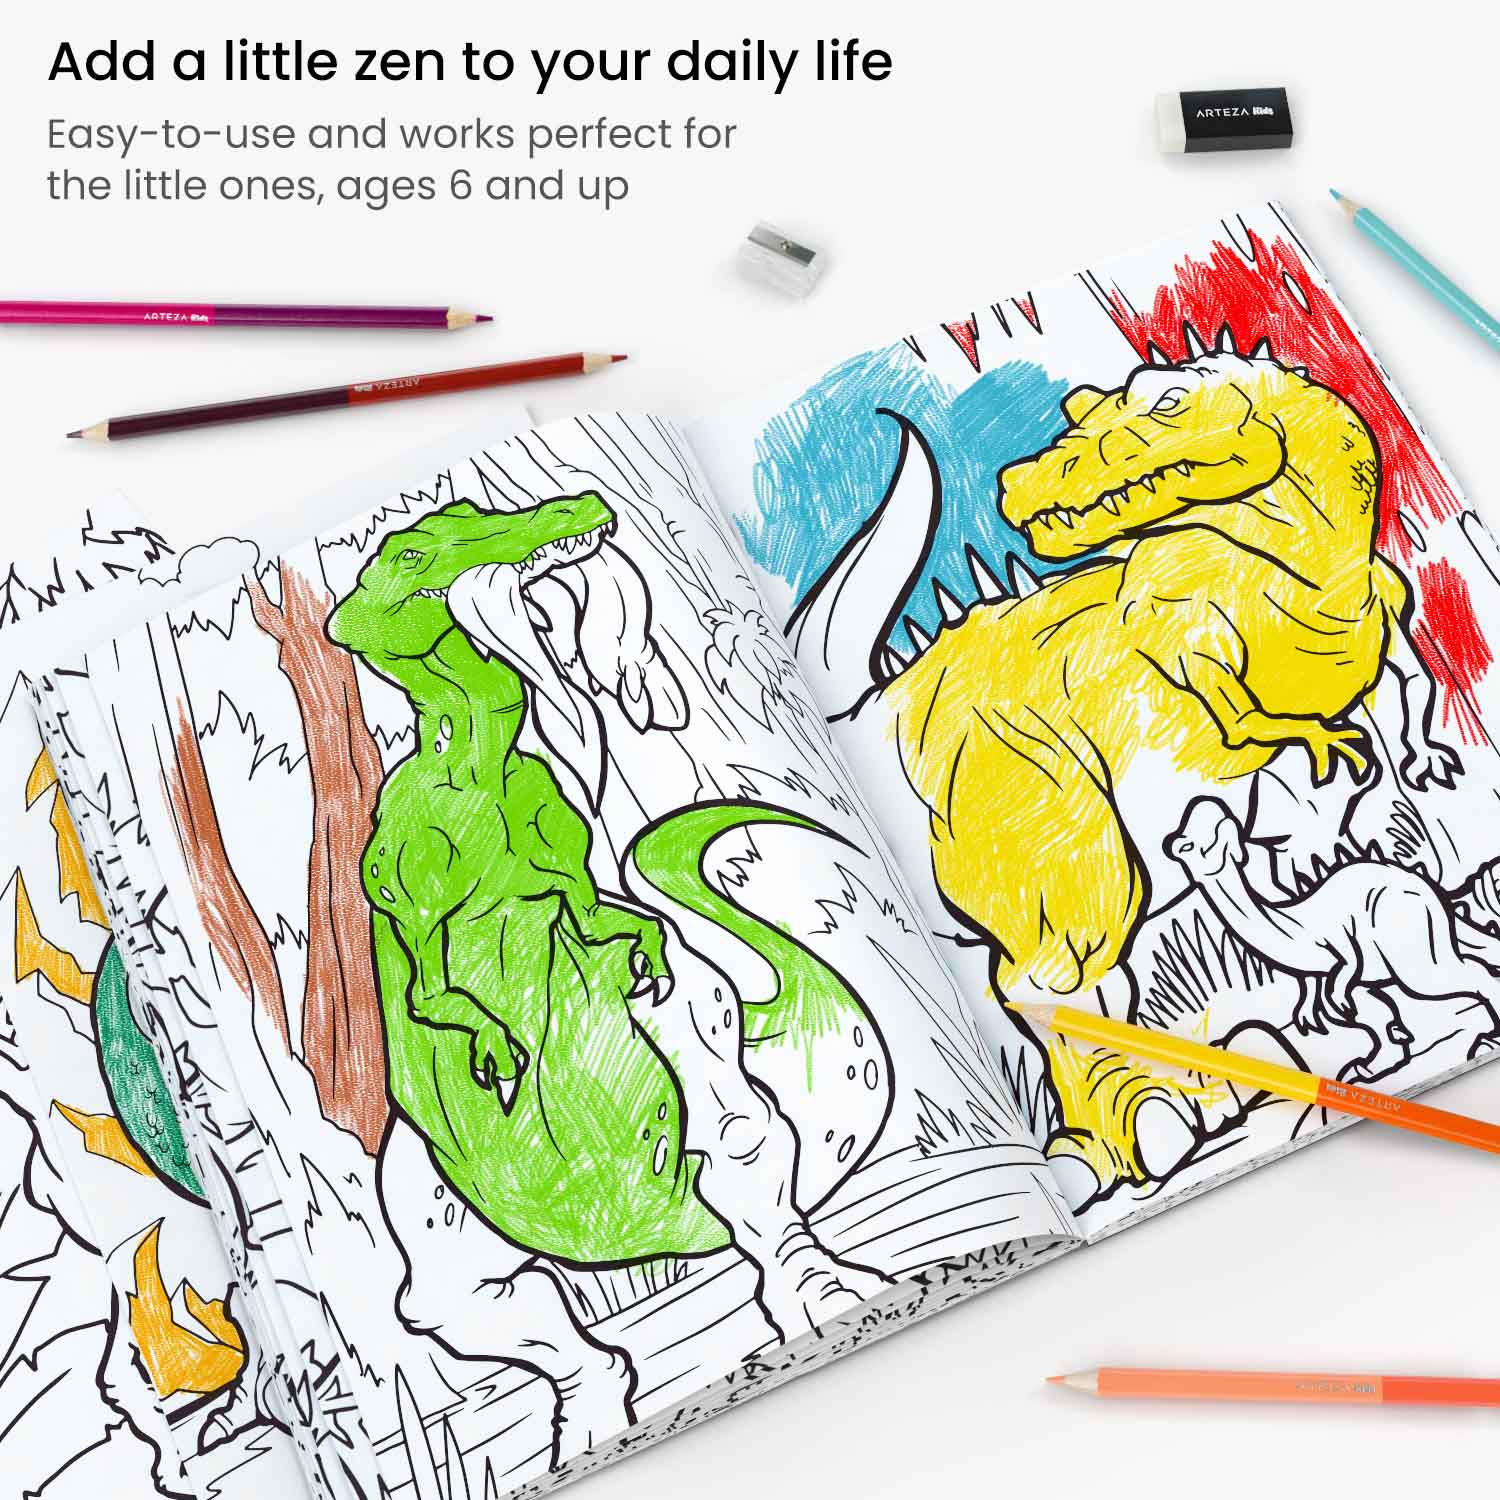 CRAFTBARN - Painting Kits for Kids Ages 4-8 | Craft Paint Set for Boys & Girls Ages 3-5 | Dinosaur Theme Children’s Paint with Water Kit Ages 6-8 